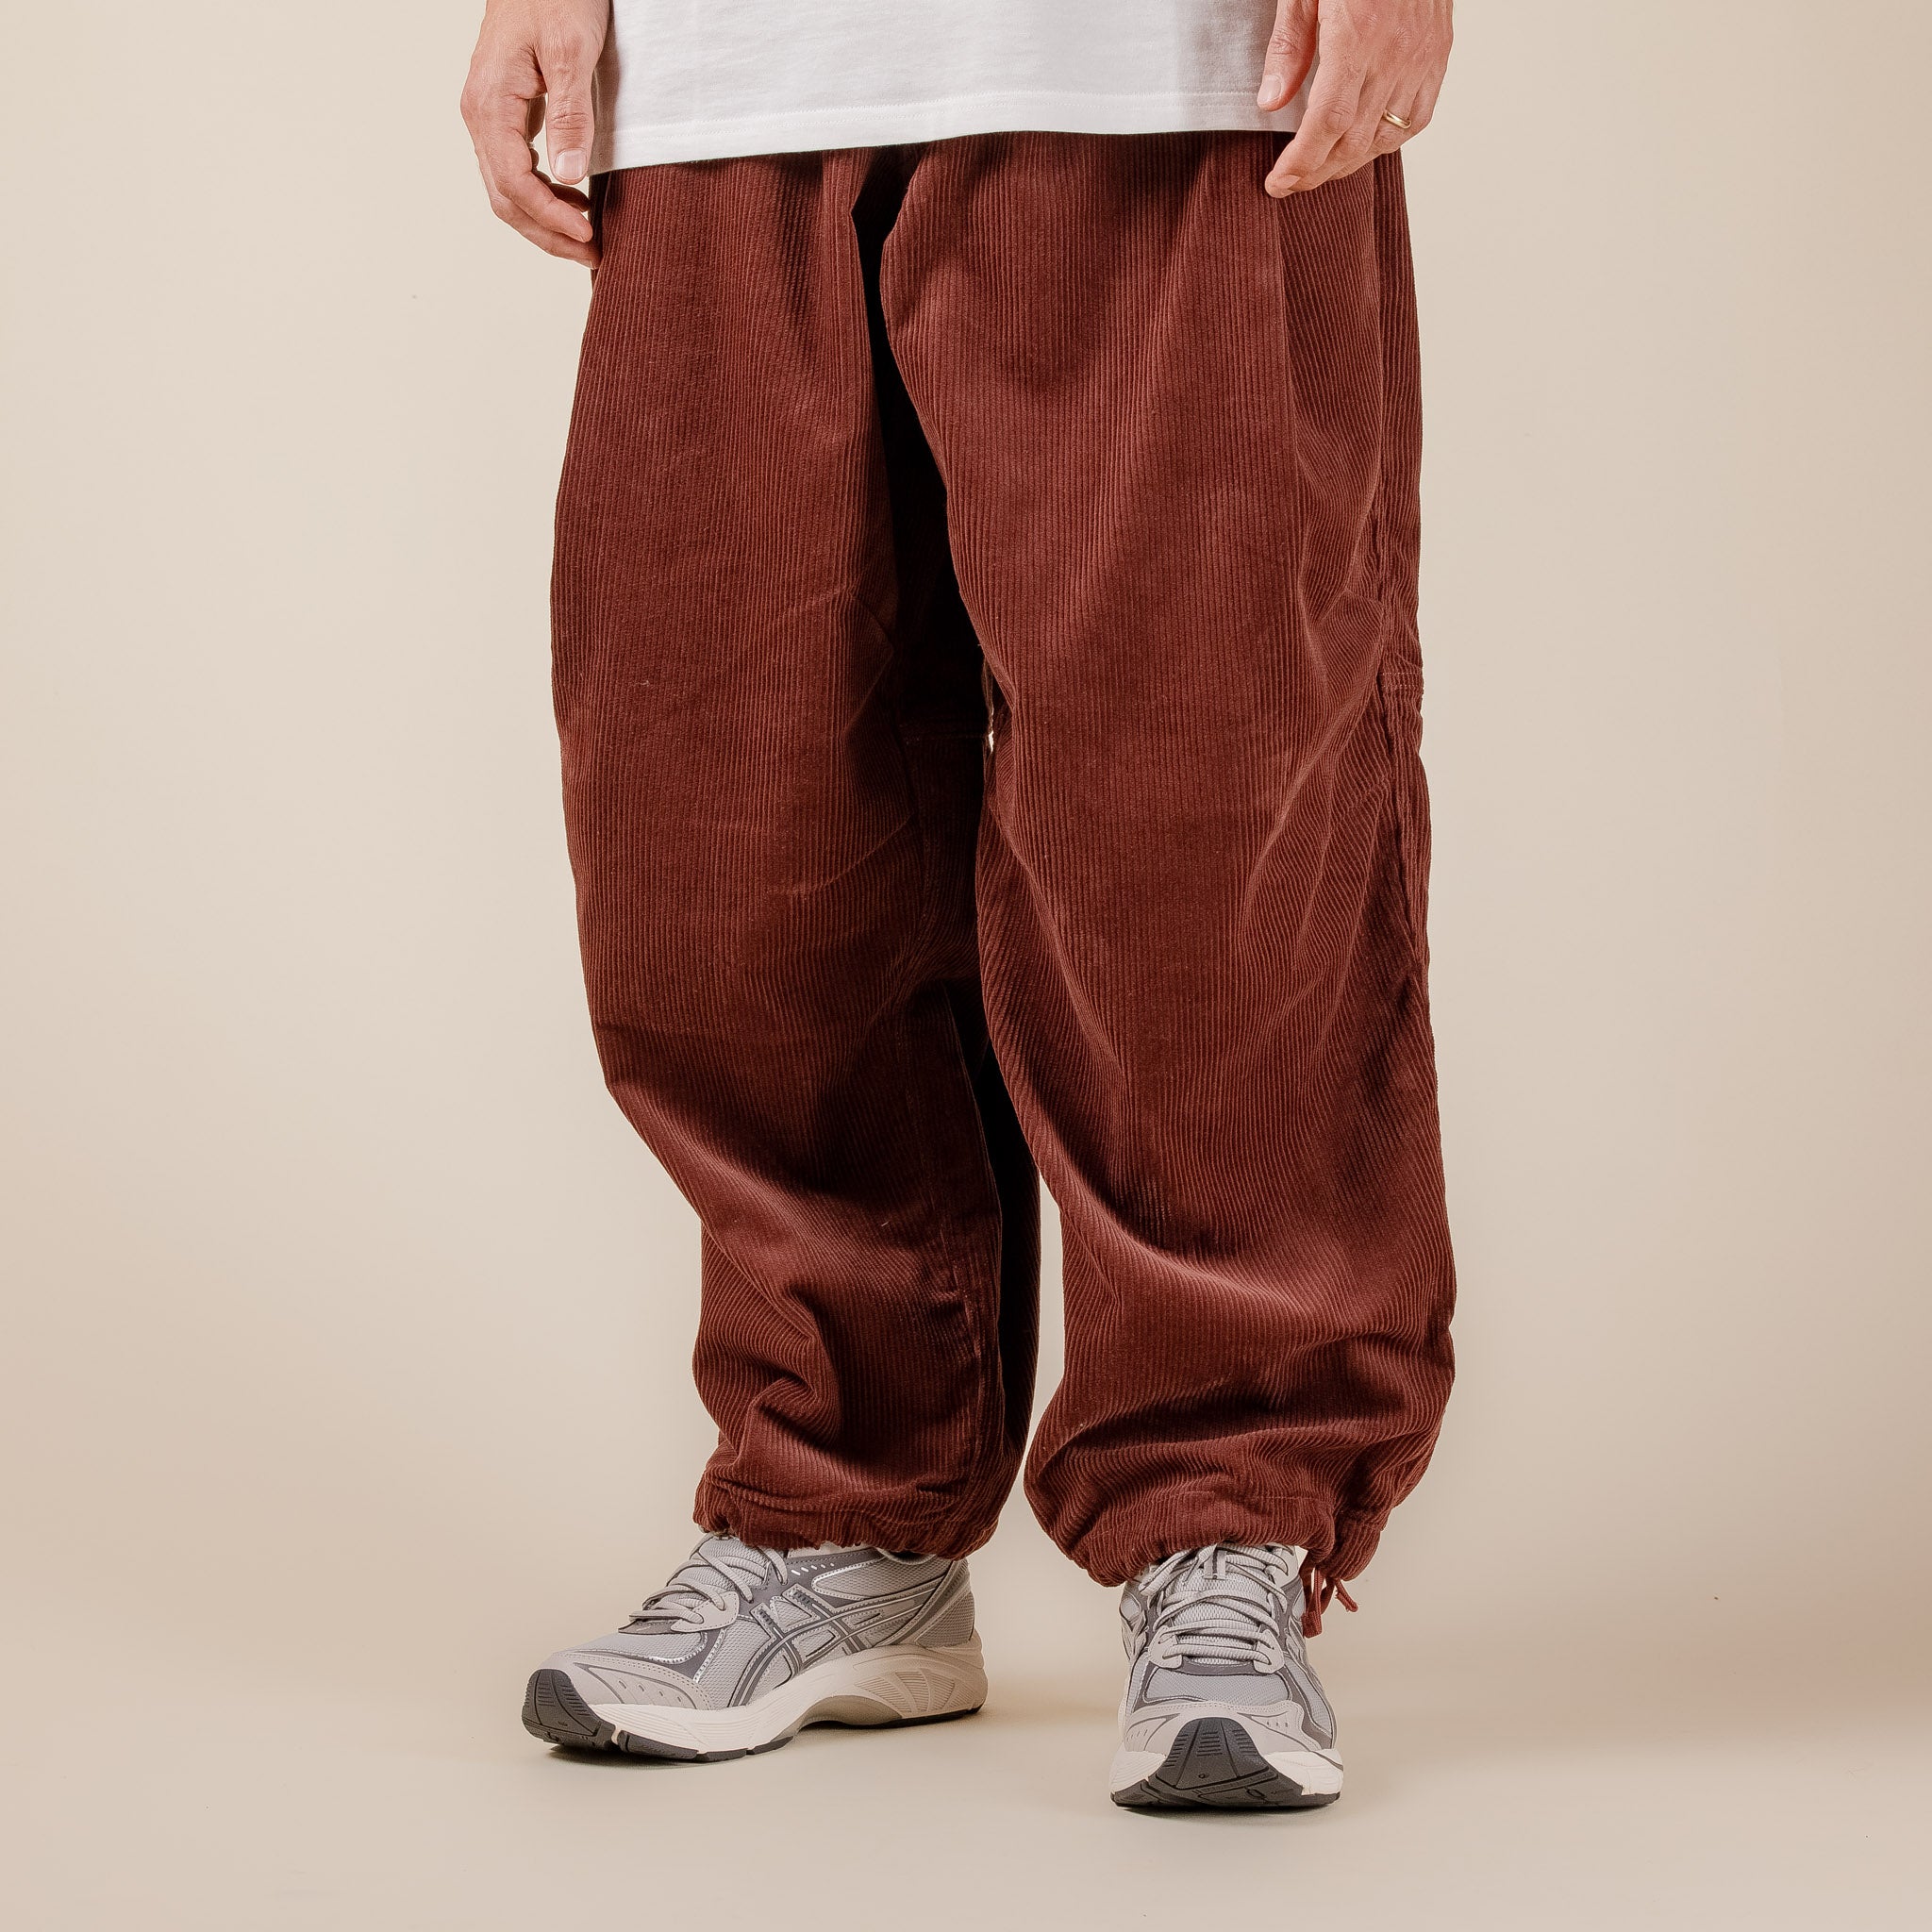 Merely Made - Corduroy Relax Wide Pants - Spice Brown 23FML212PT